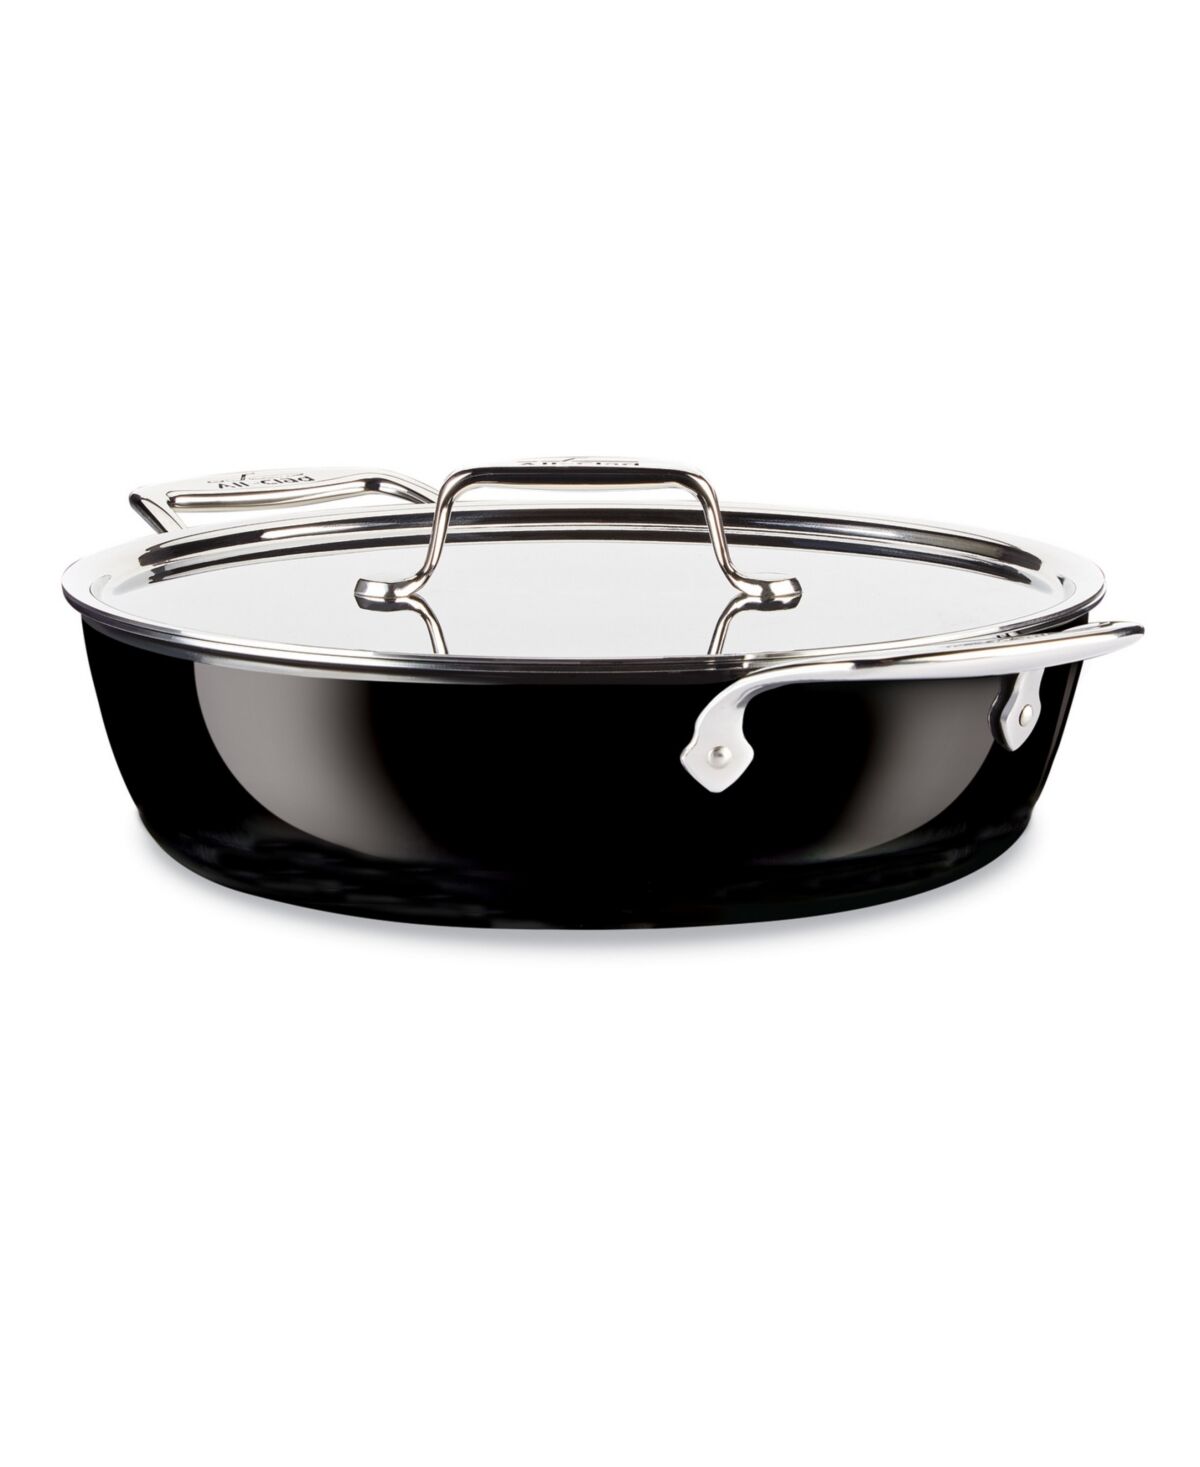 All-Clad Fusiontec Natural Ceramic with Steel Core 4.5 Qt. Universal Pan with Lid - Black